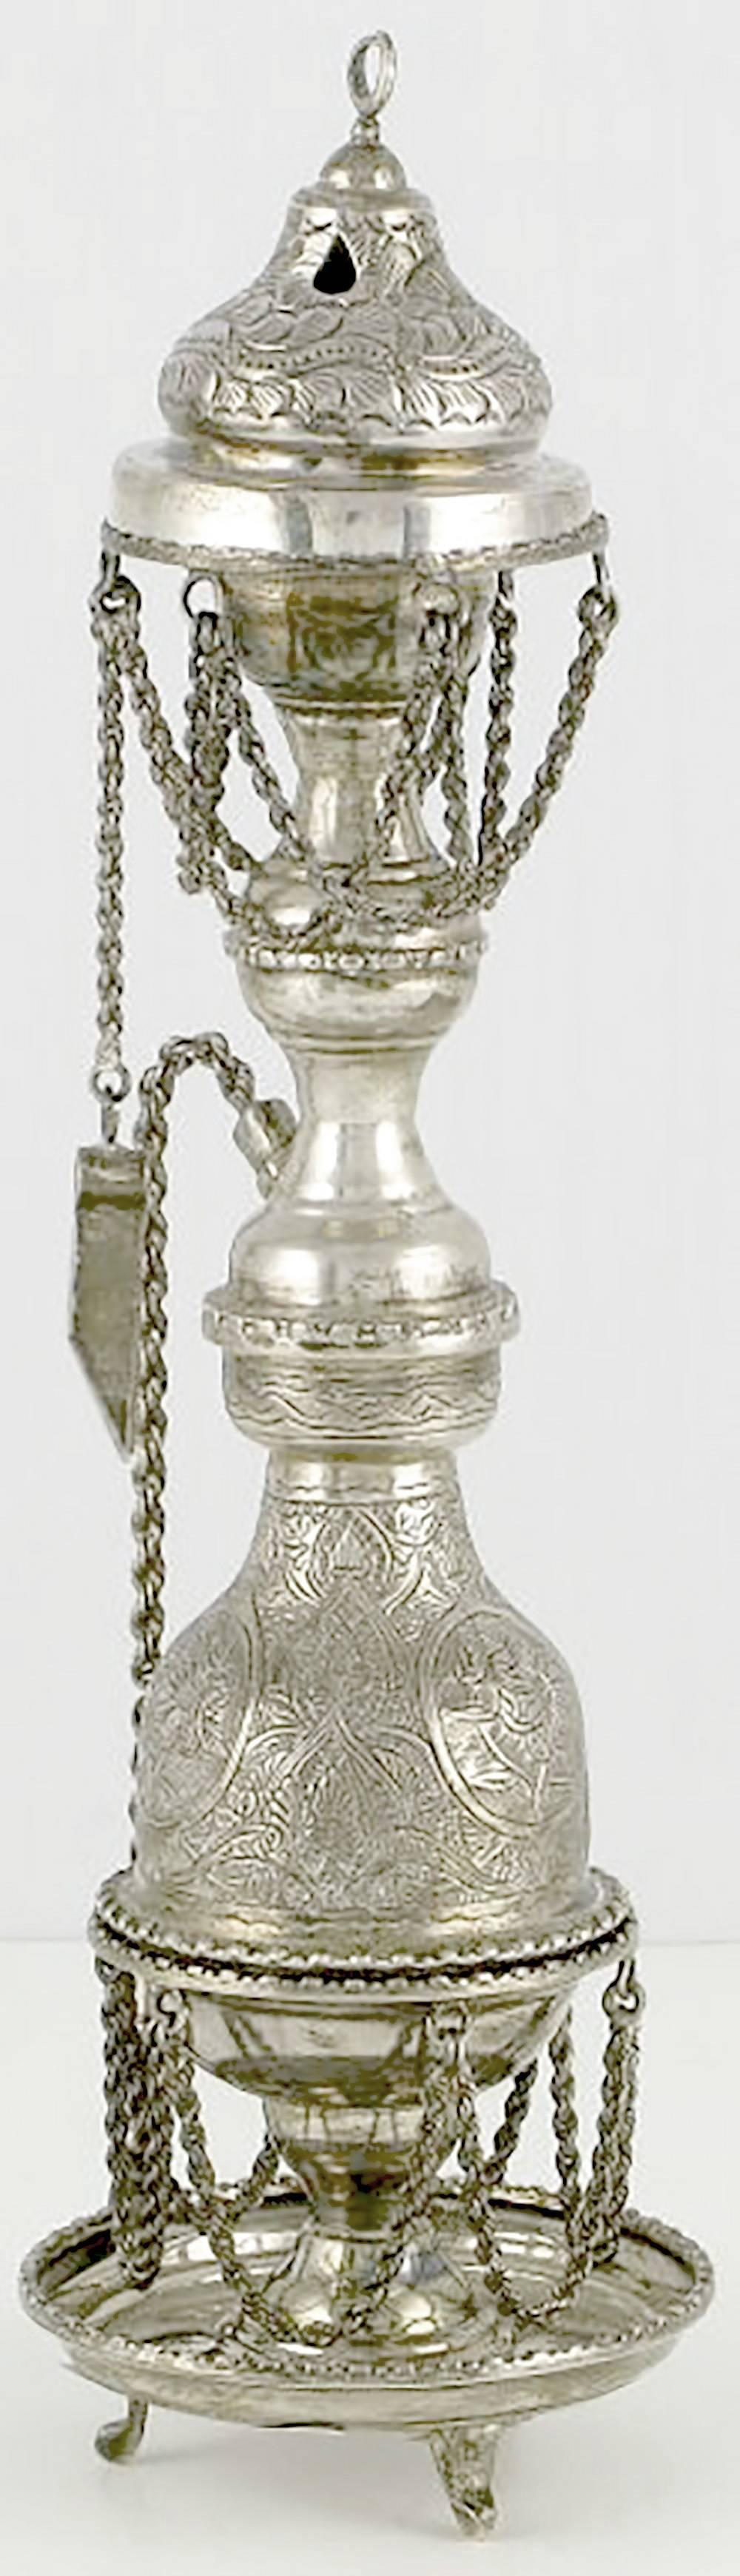 Exquisitely worked multi-tiered incense burner from Persia/Iran. Decorative woven chain, cutter and extinguisher all add to the charm of the piece.